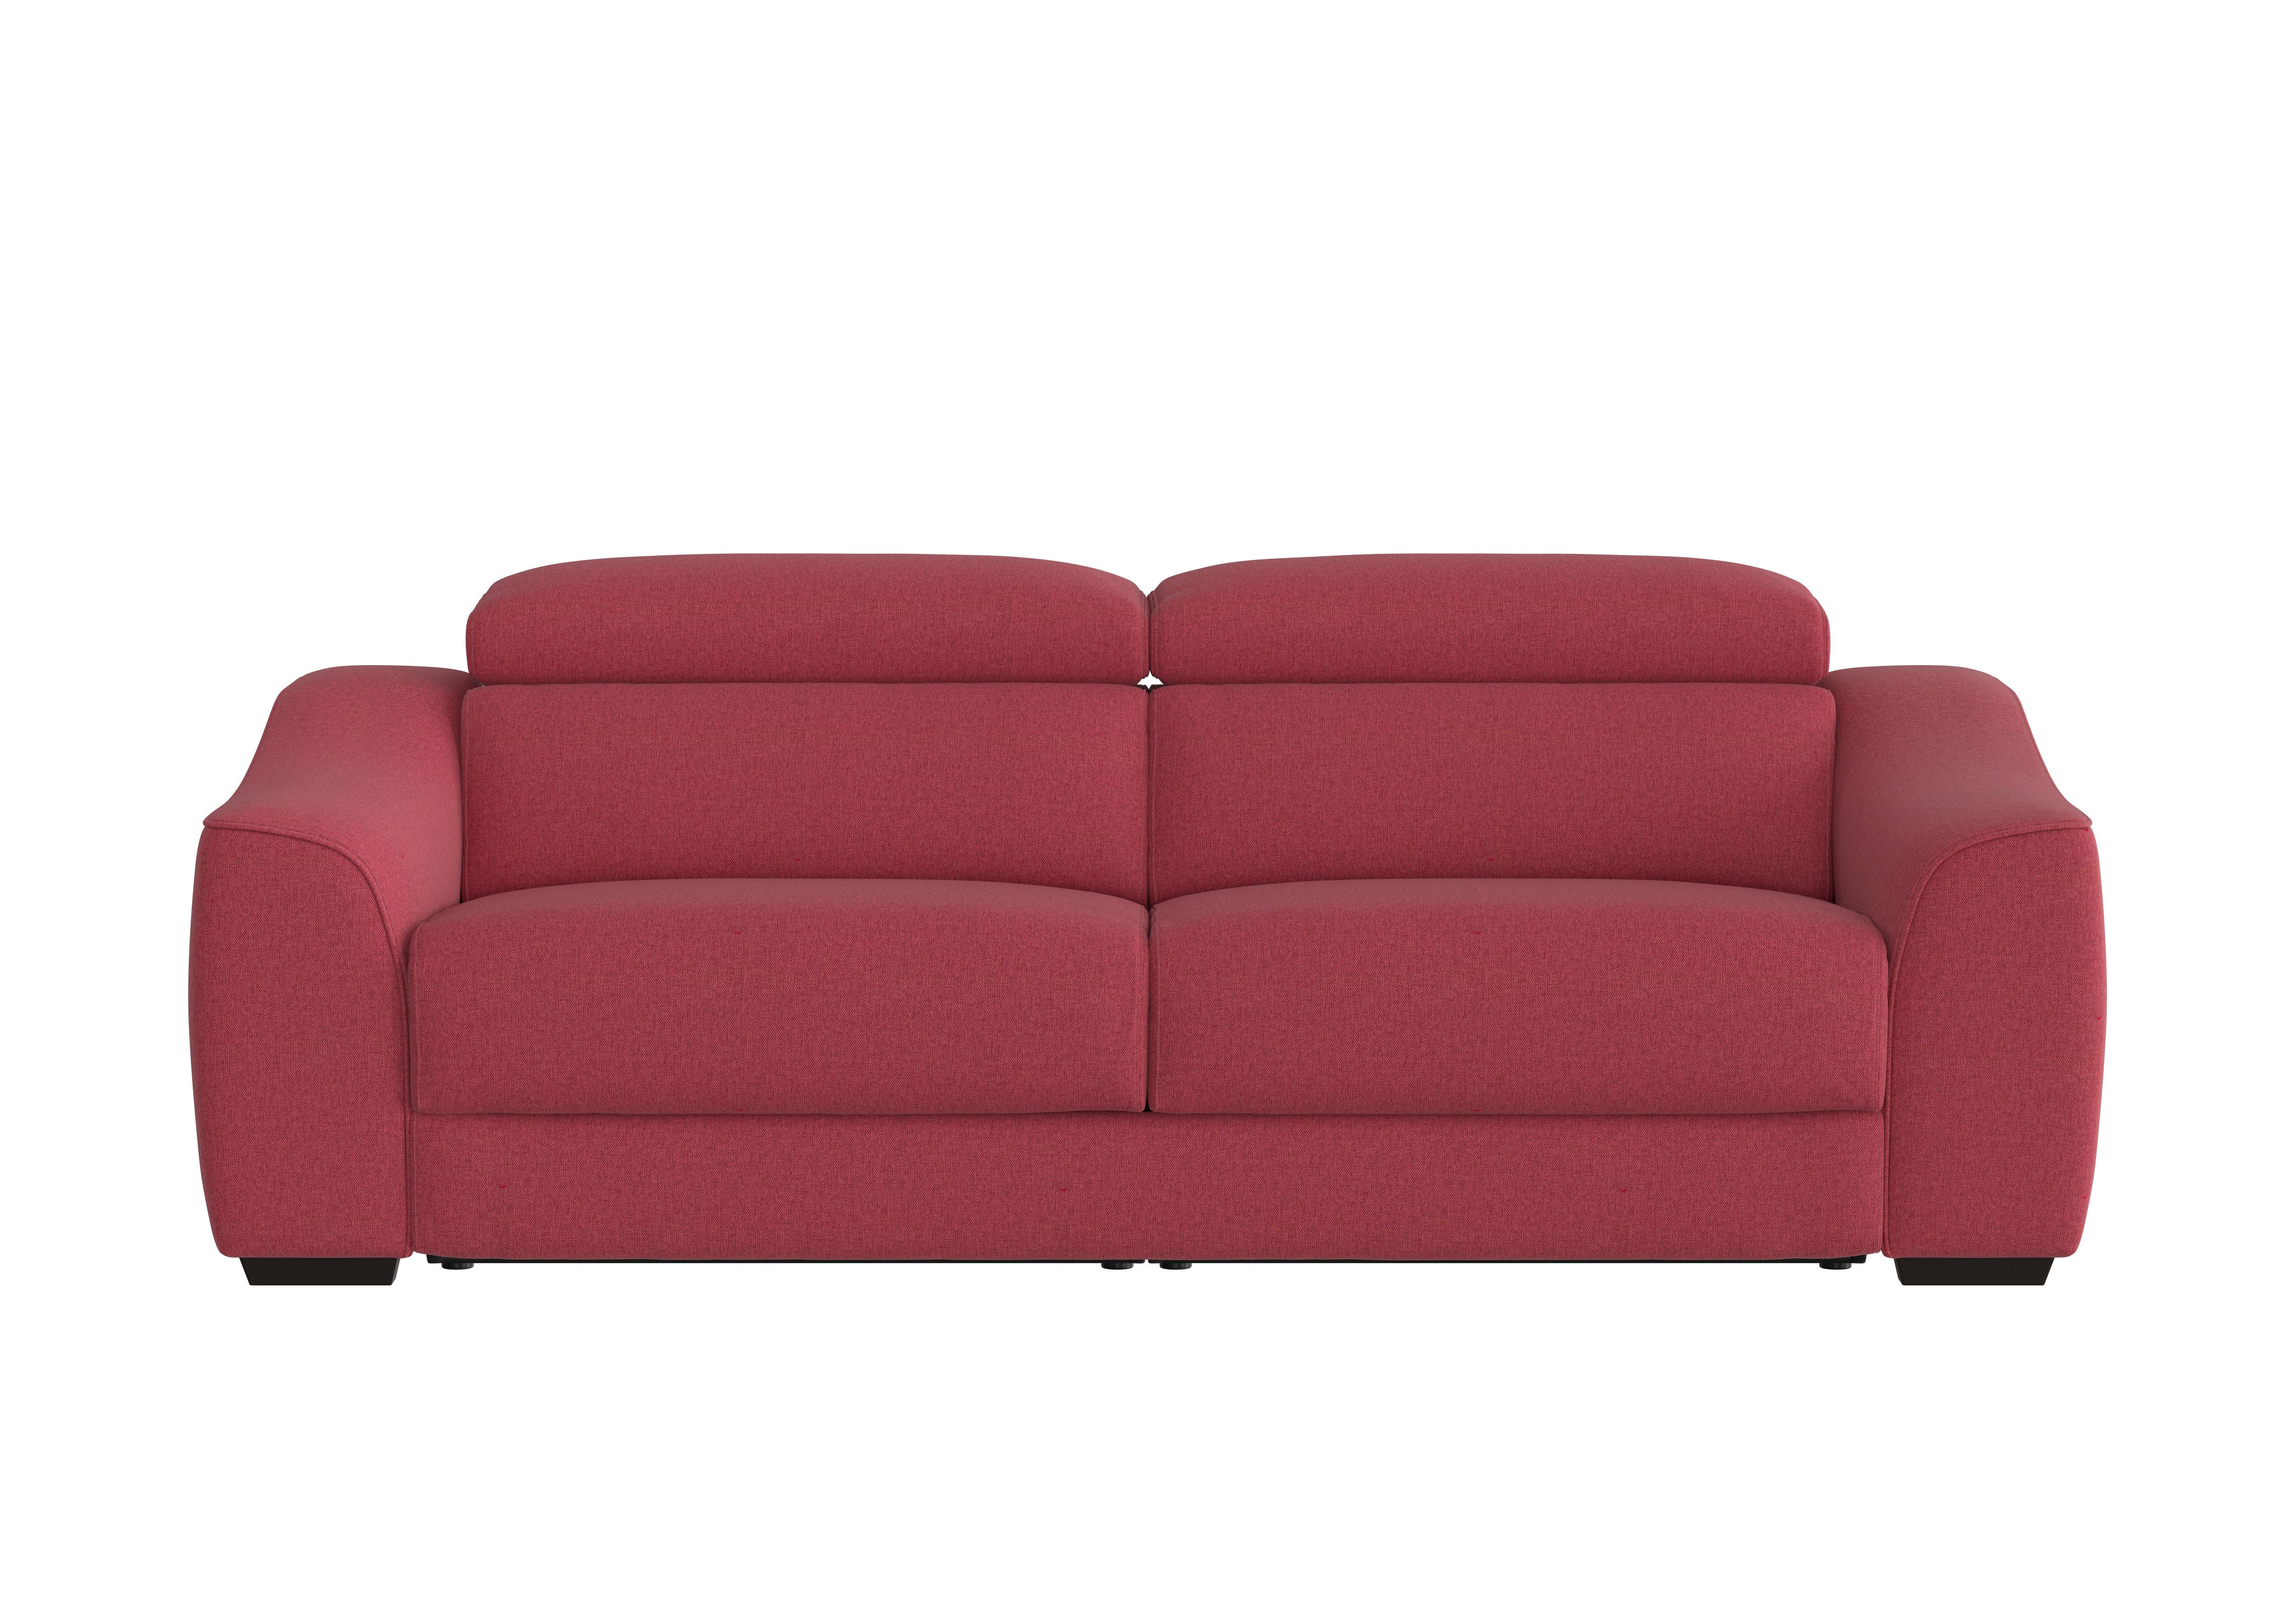 Elixir 3 Seater Fabric Sofa Bed in Fab-Blt-R29 Red on Furniture Village